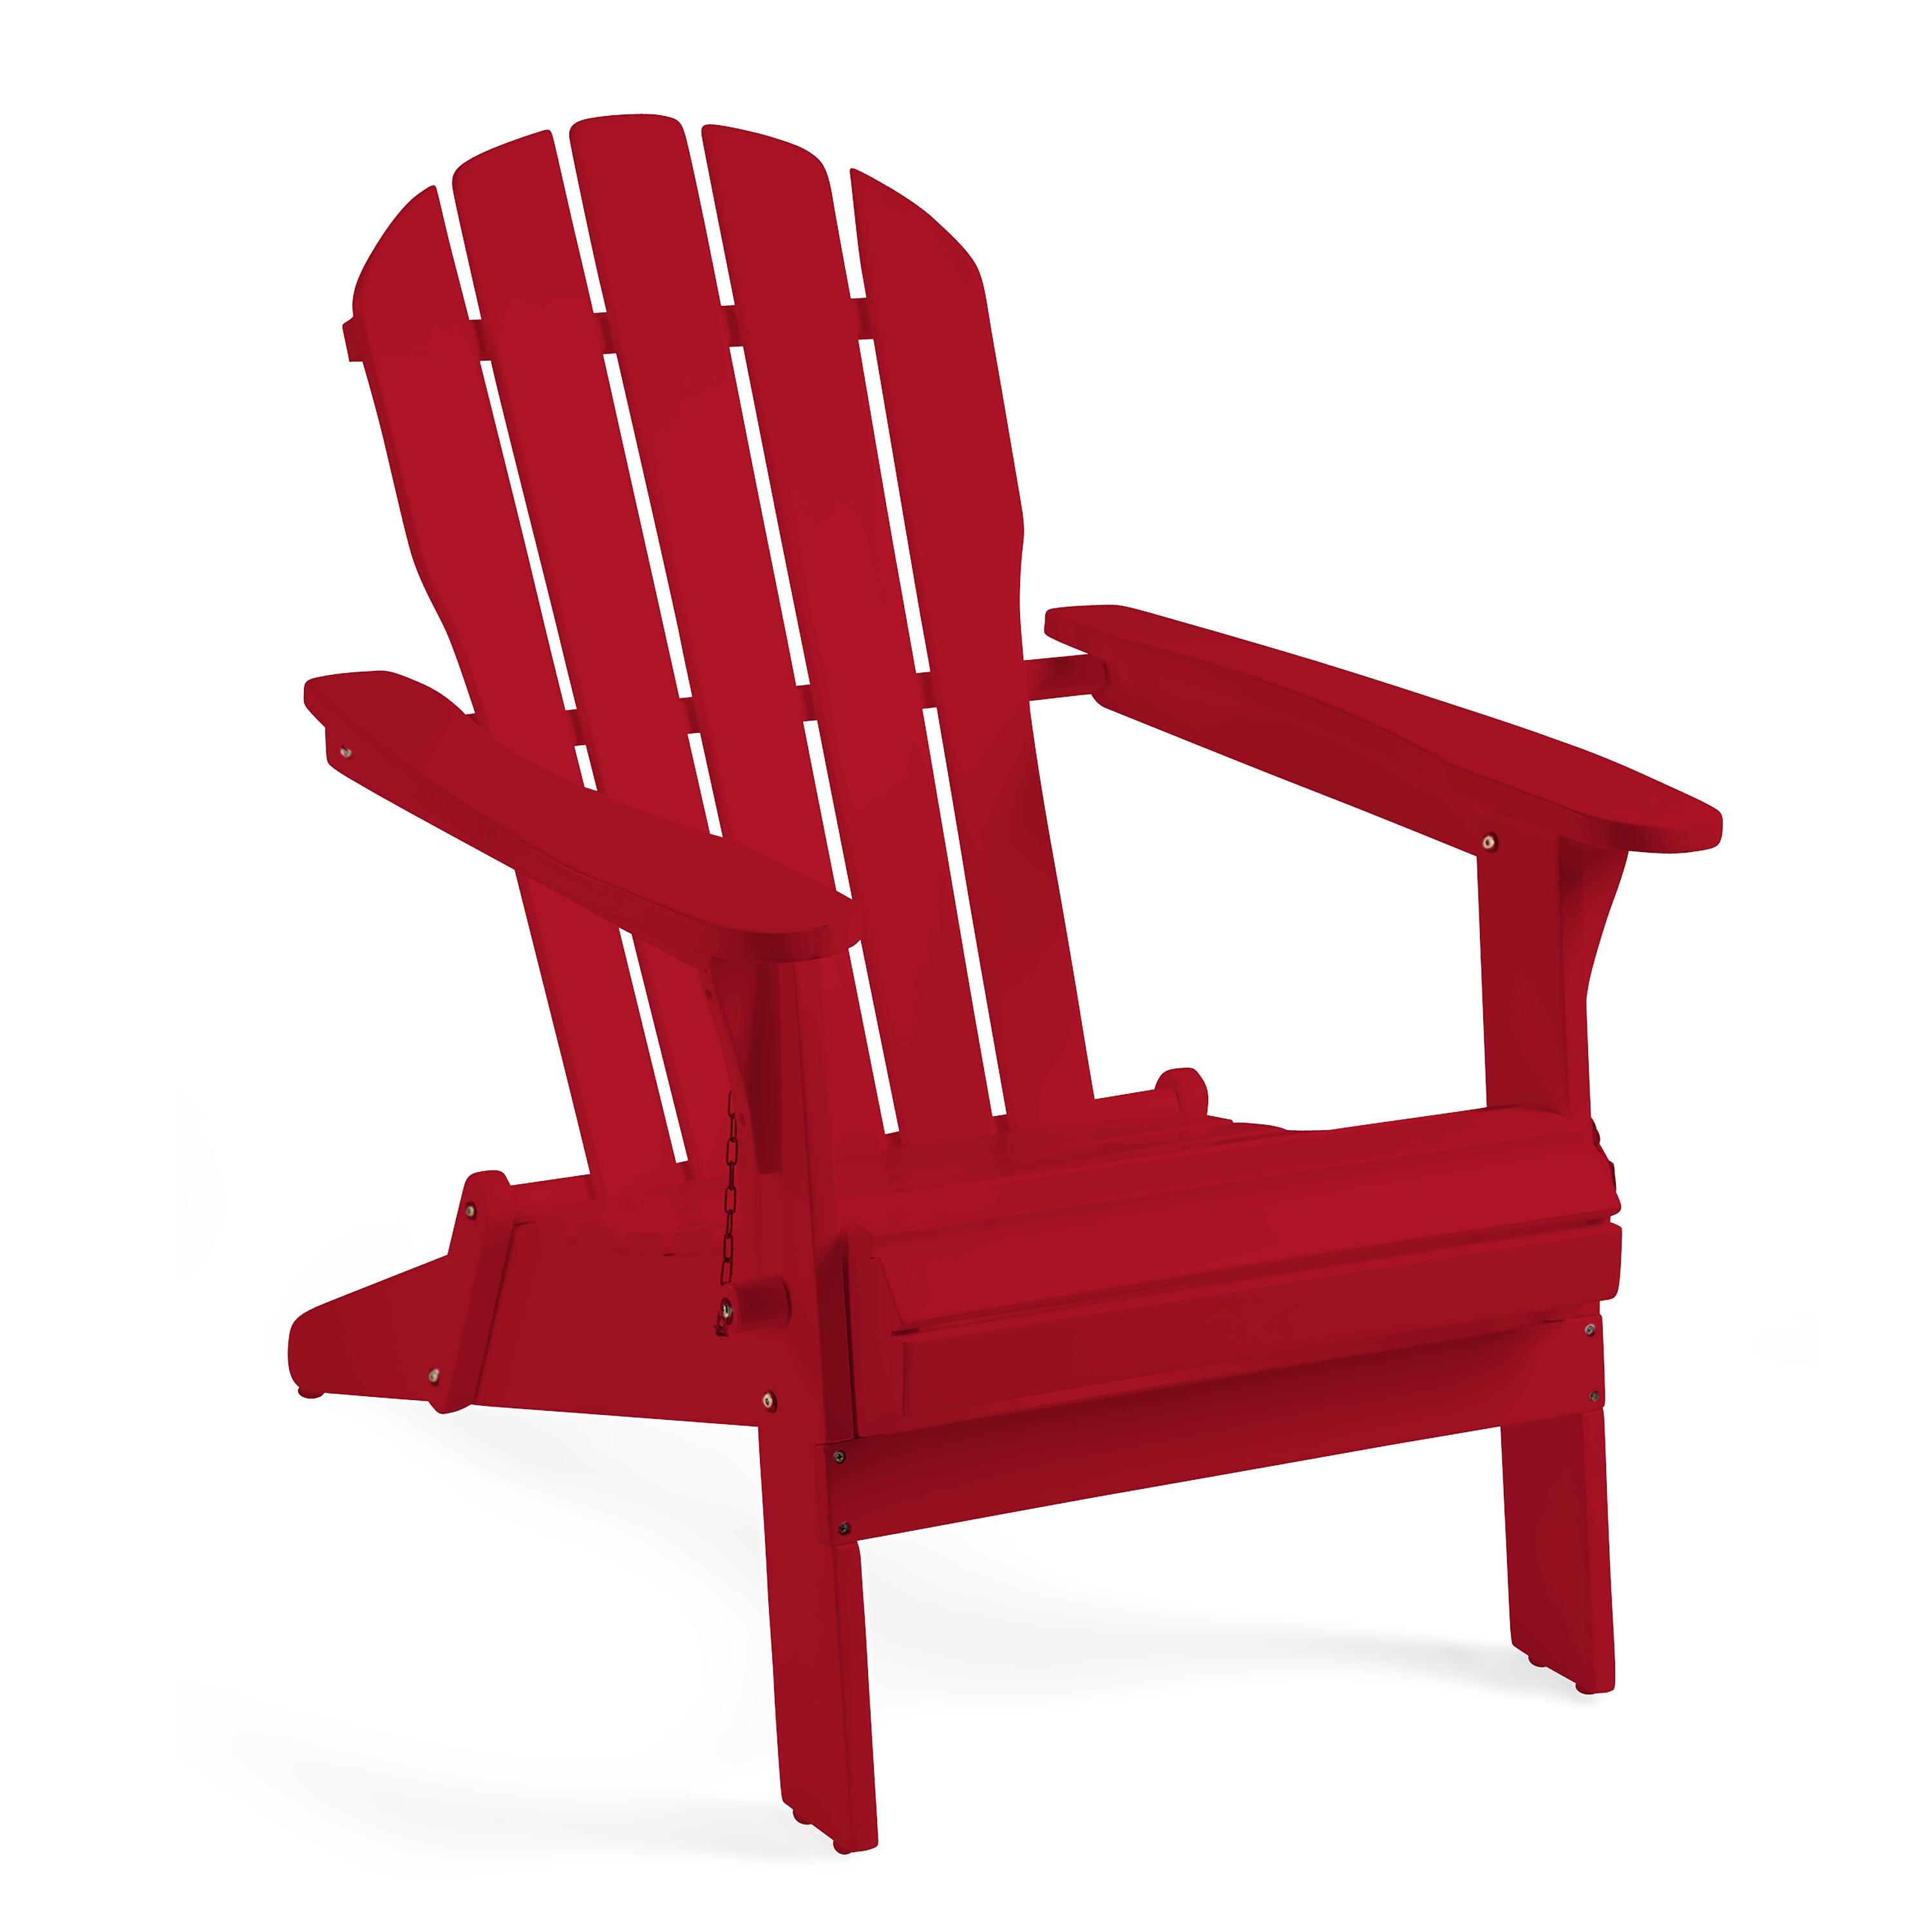 FSC-Certified Eucalyptus Wood Outdoor Adirondack Chair, in Red Paint